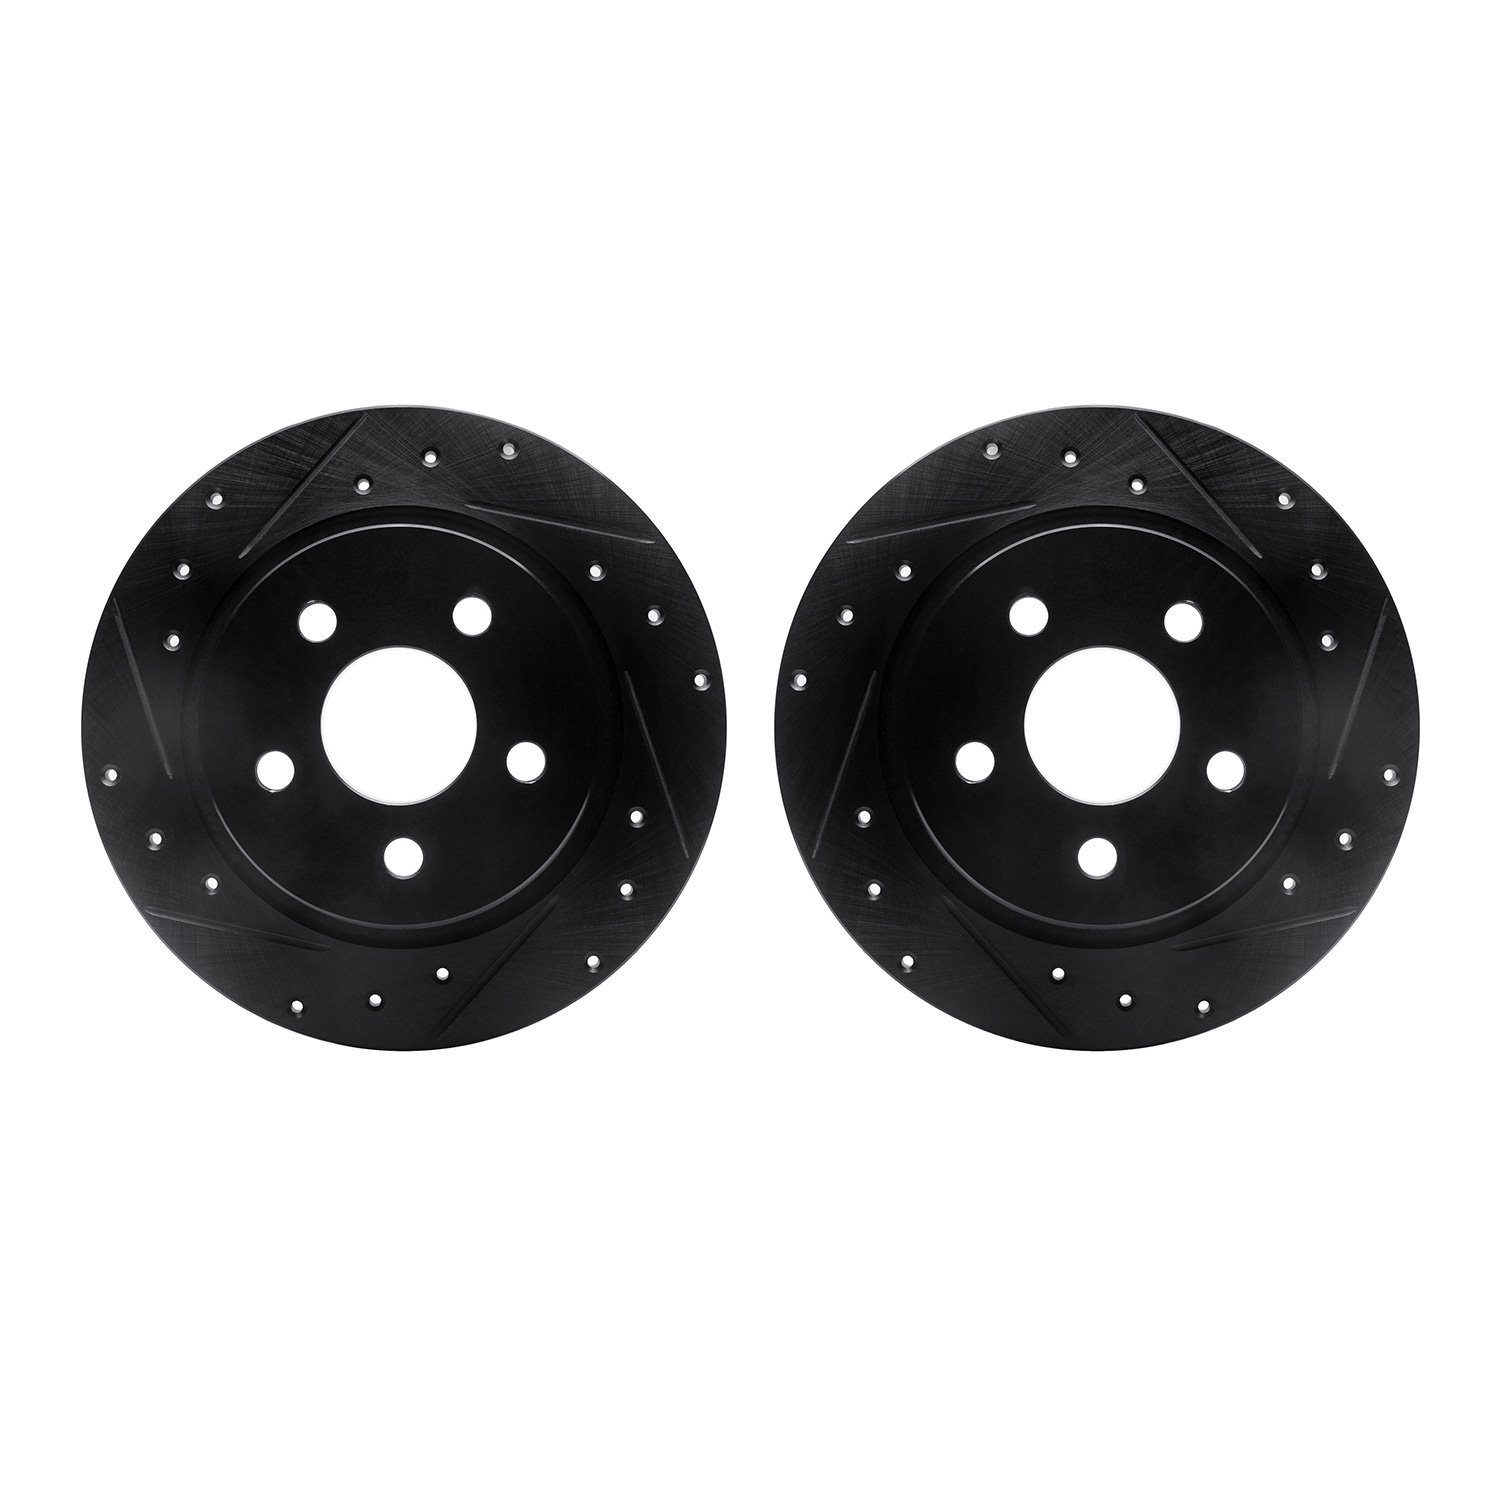 8002-54250 Drilled/Slotted Brake Rotors [Black], Fits Select Ford/Lincoln/Mercury/Mazda, Position: Rear